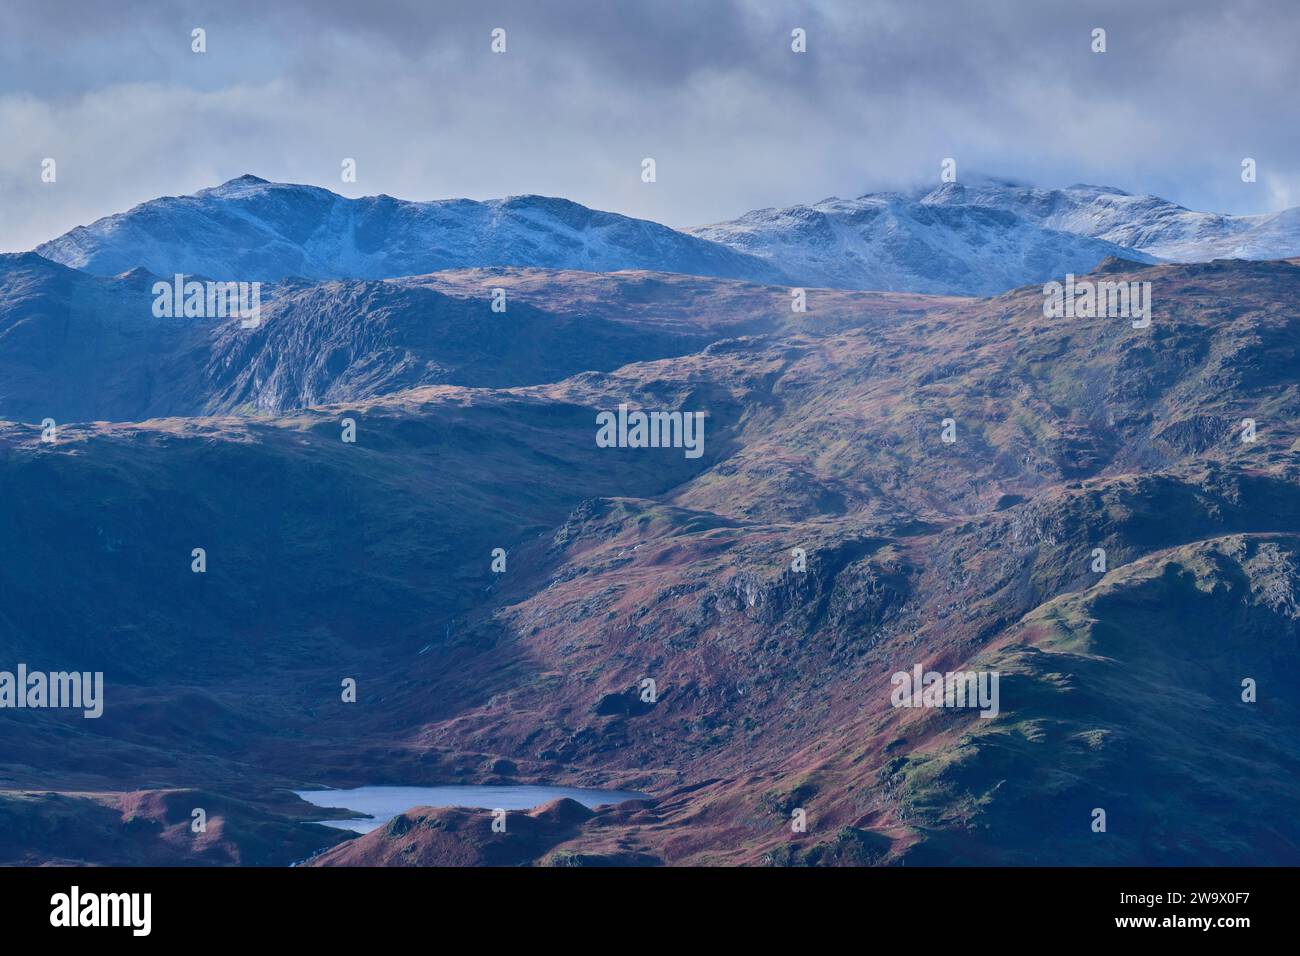 Easedale Tarn, Bowfell, and Esk Pike seen from near Great Rigg, Grasmere, Lake District, Cumbria Stock Photo